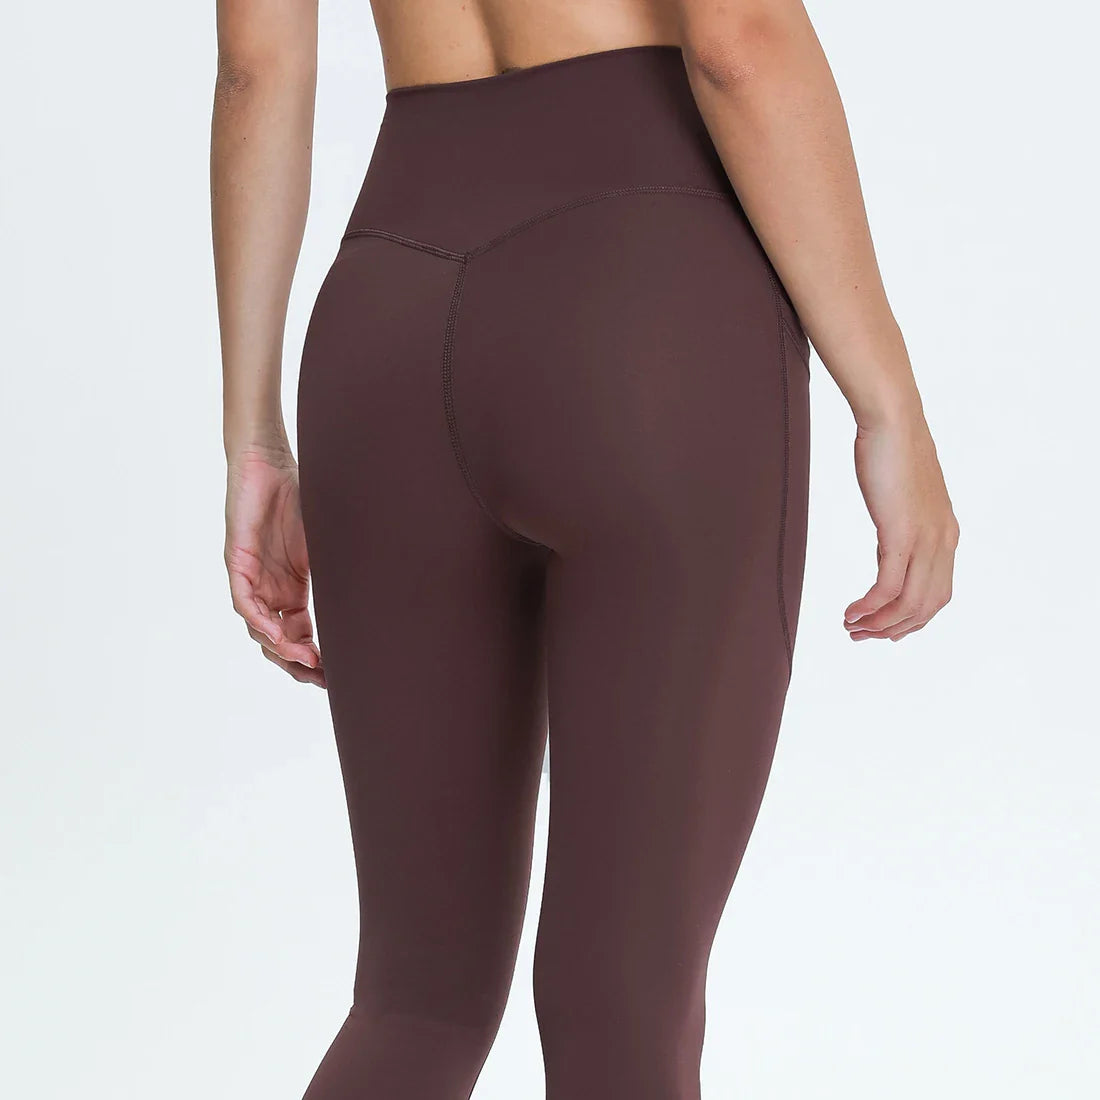 Canmol LOVELIFE High Waist Yoga Leggings with Side Pockets Butter Soft 28" Inseam